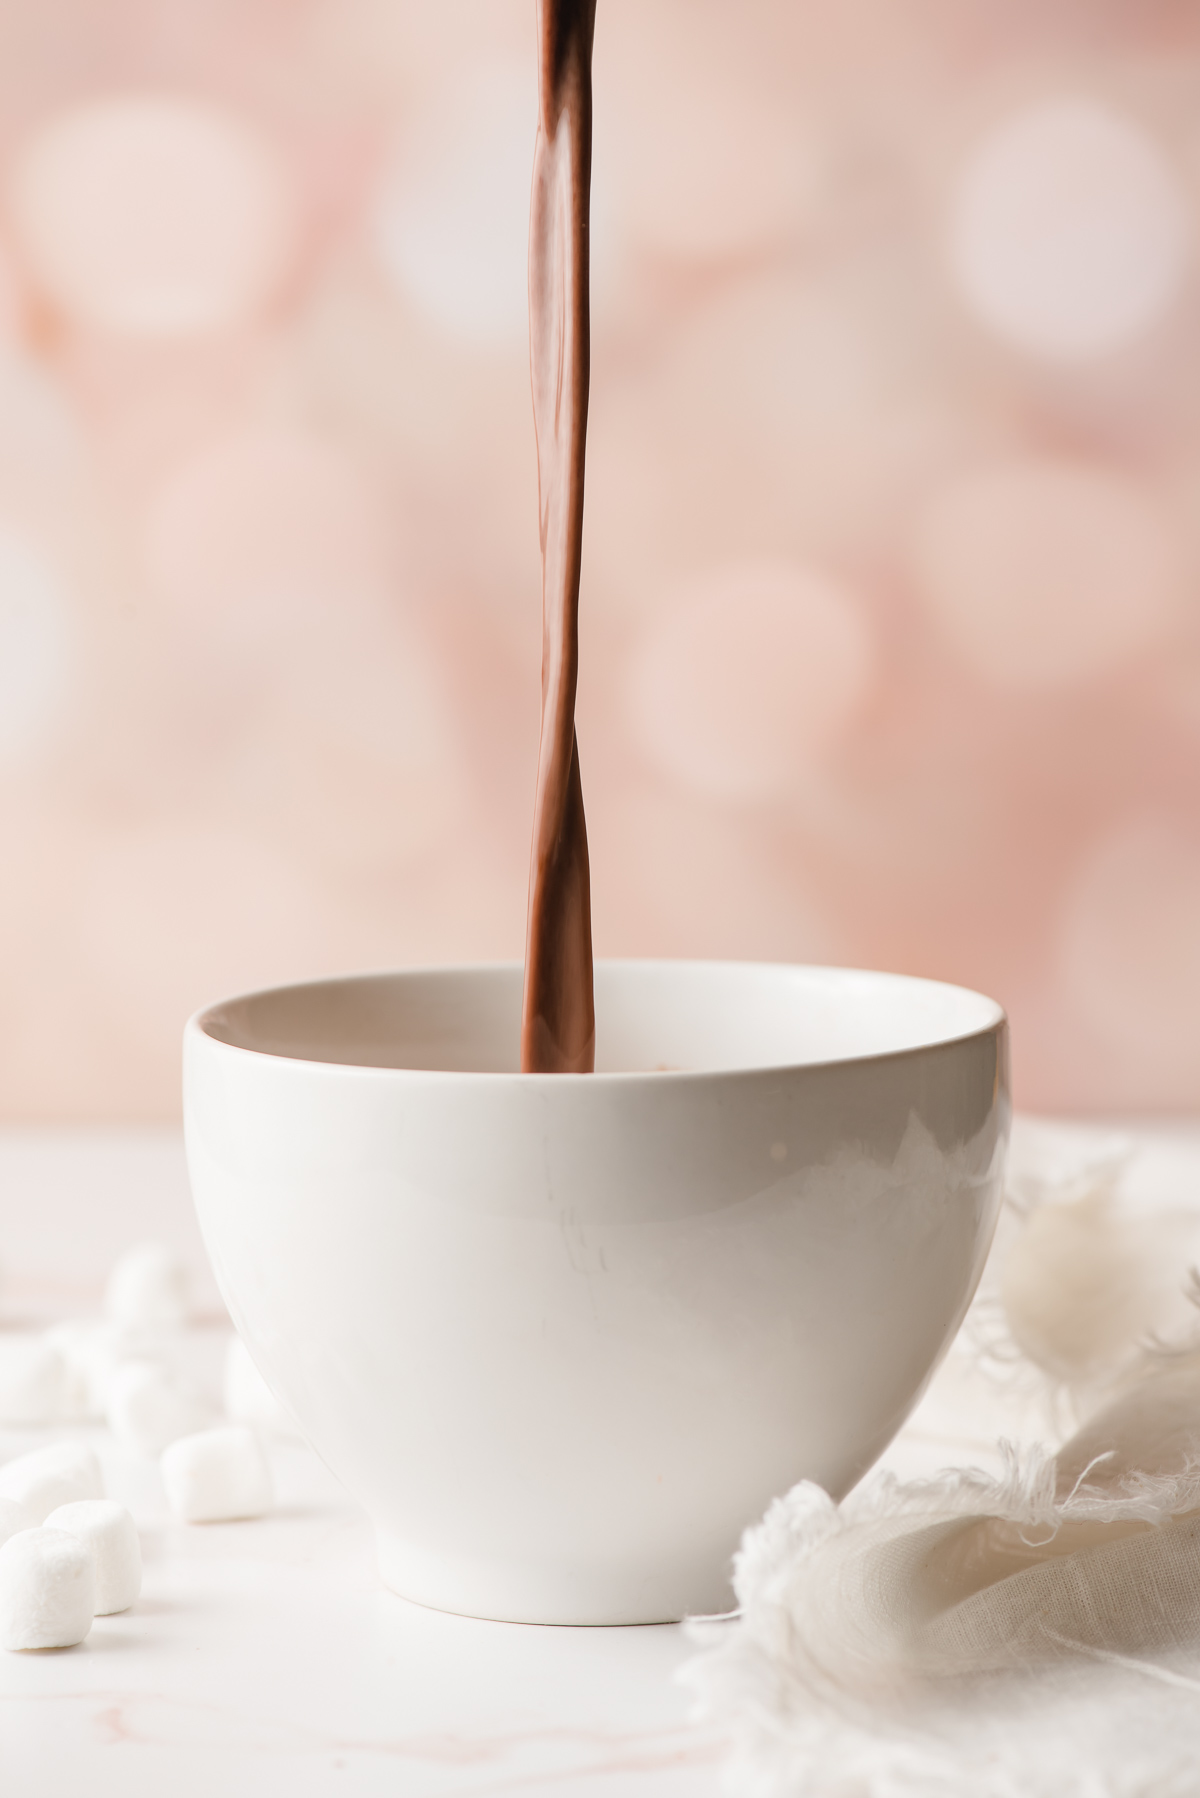 Hot chocolate being poured from a sauce pot into a white mug.